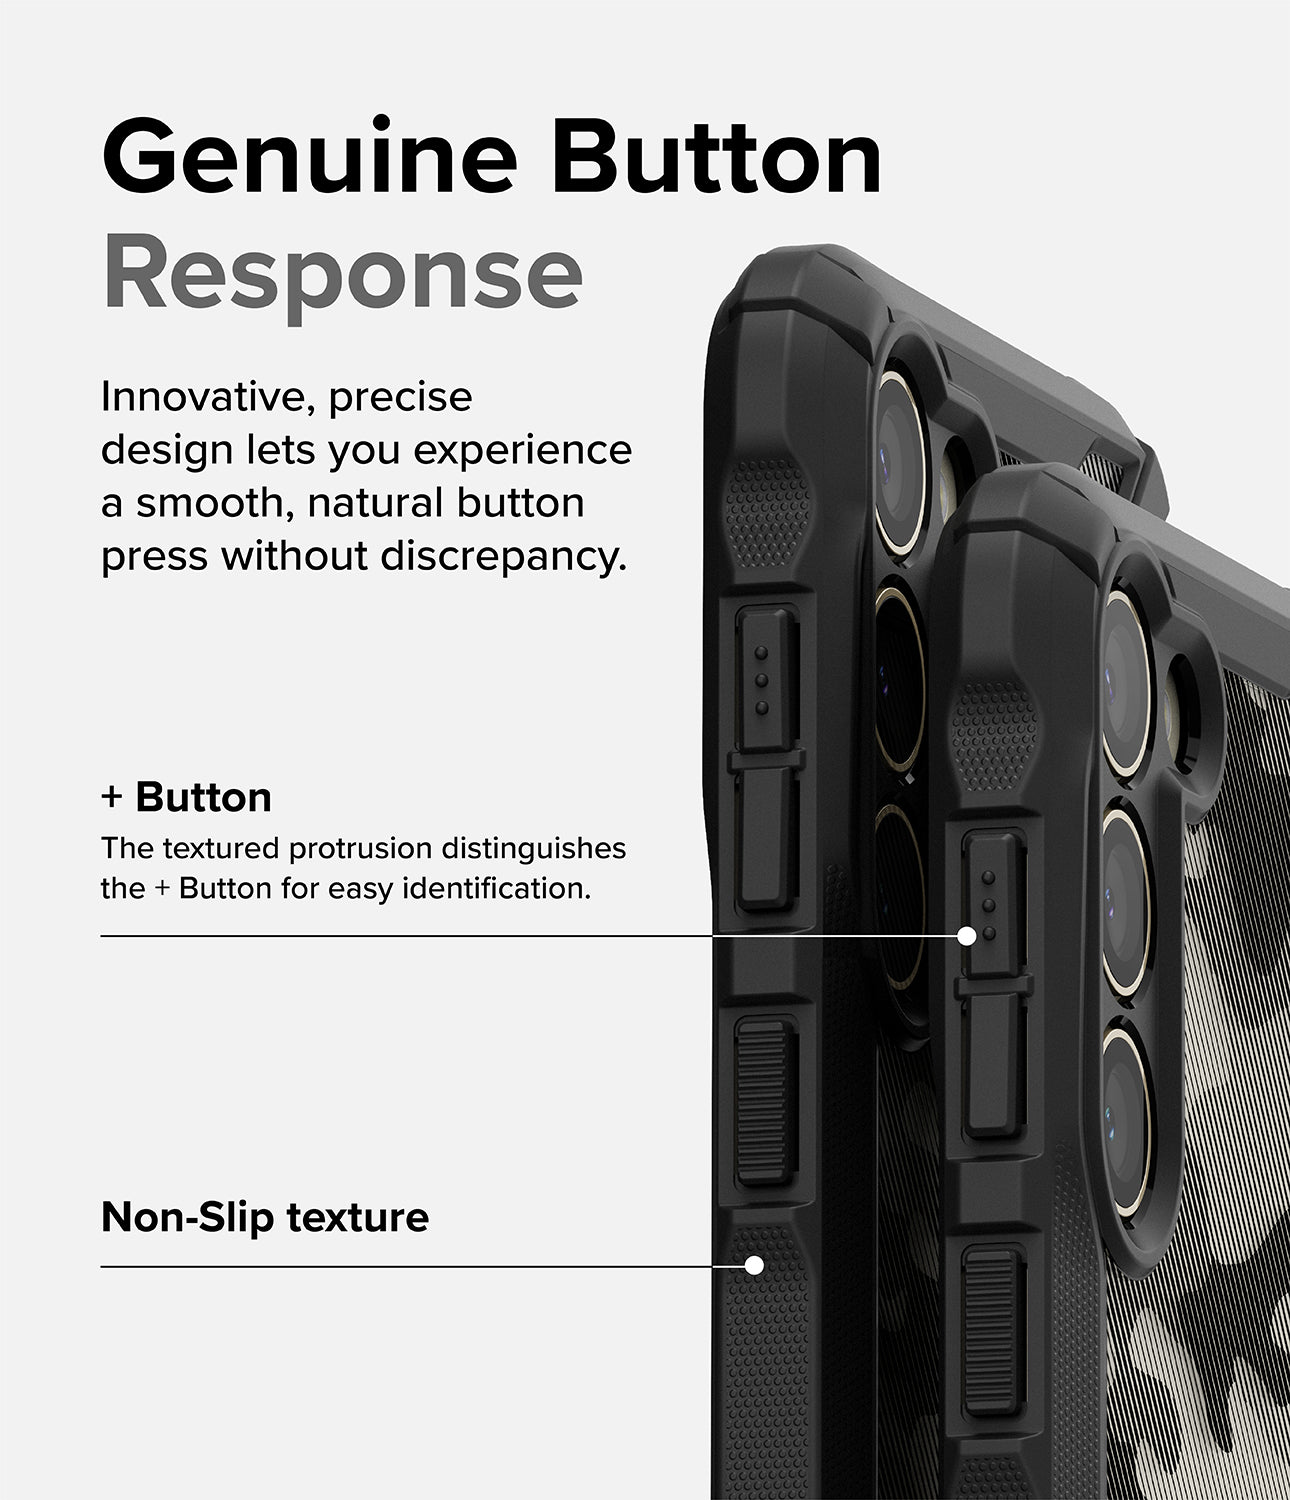 Galaxy S23 Plus Case | Fusion-X - Camo Black - Genuine Button Response. Innovative, precise design lets you experience a smooth, natural button press without discrepancy. + Button. The textured protrusion distinguishes the + Button for easy identification. Non-Slip texture.